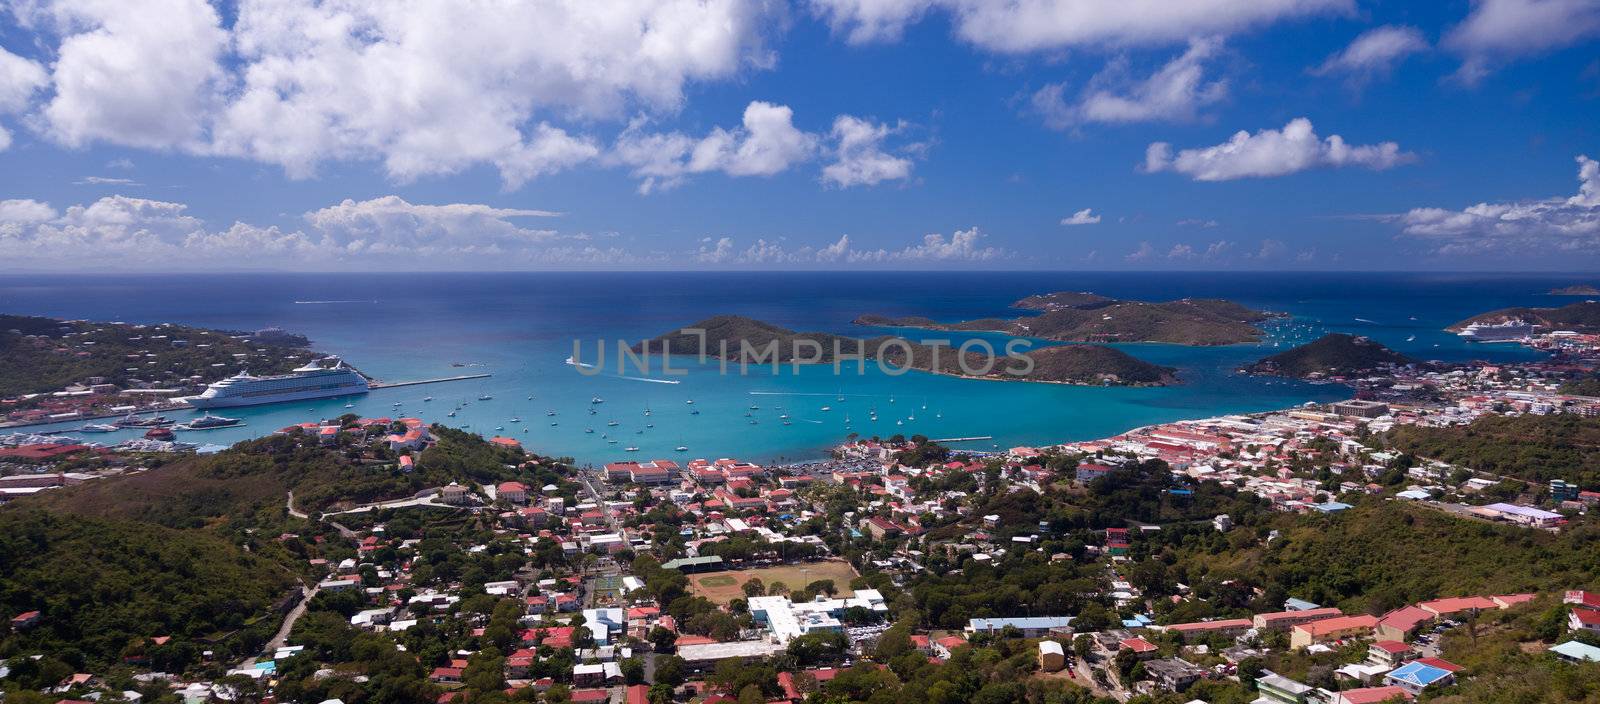 Aerial view of Charlotte Amalie Harbour in St Thomas